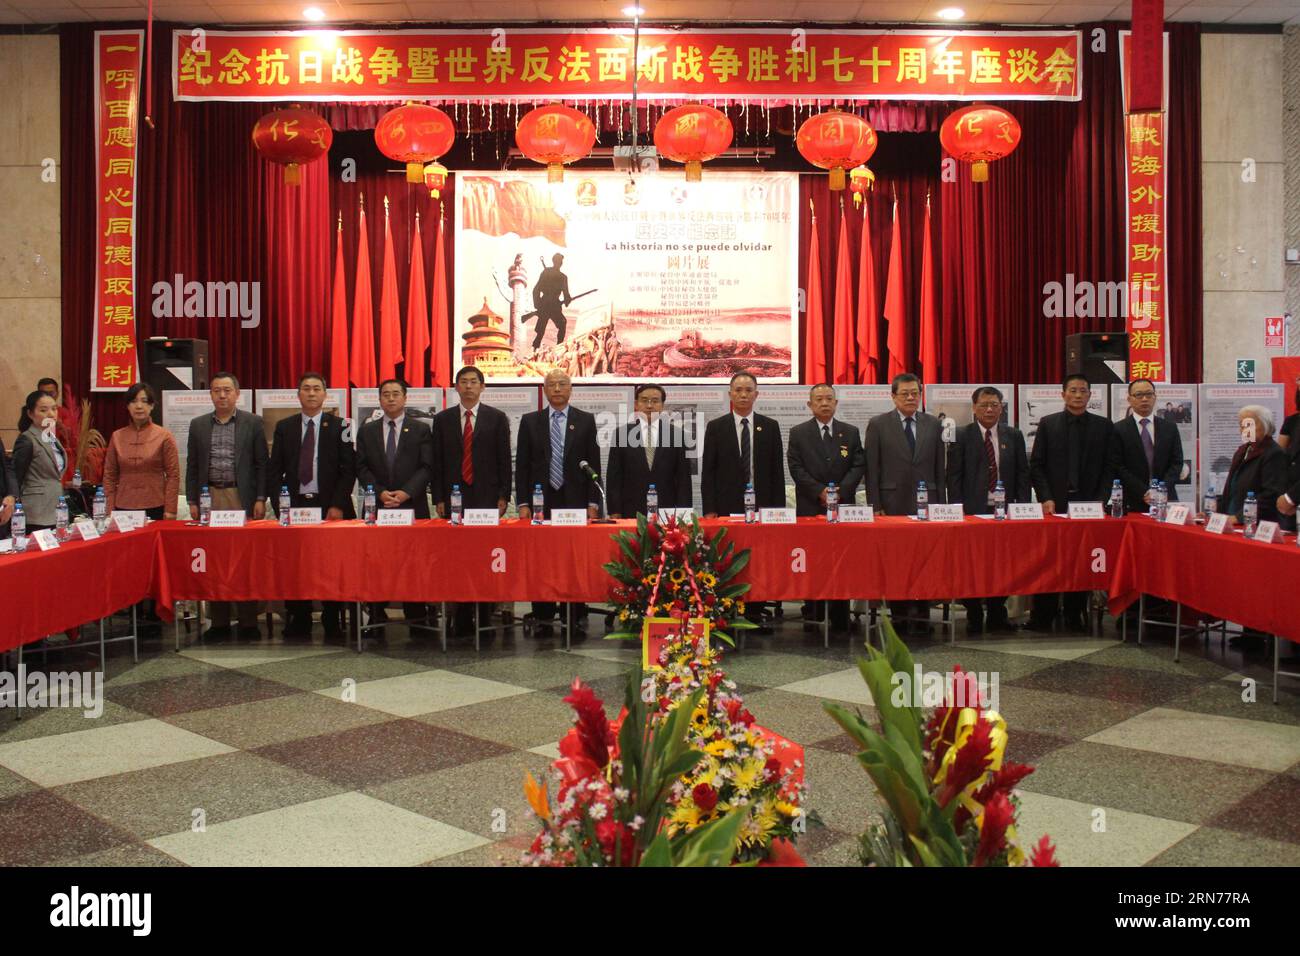 Chinese Ambassador to Peru Jia Guide (C) attends the exposition La Historia No Se Puede Olvidar (History Can Not Be Forgotten) at the facilities of the Chinese Charity Central Society in Lima city, Peru, on Aug. 22, 2015. Chinese community in Peru is celebrating the 70th anniversary of the victory of the World Anti-Fascist War with an exposition called La Historia No Se Puede Olvidar (History Can Not Be Forgotten). ) (rhj) PERU-LIMA-CHINA-ANNIVERSARY-EXPOSITION LuisxCamacho PUBLICATIONxNOTxINxCHN   Chinese Ambassador to Peru Jia Guide C Attends The Exposure La Historia No SE Puede  History CAN Stock Photo